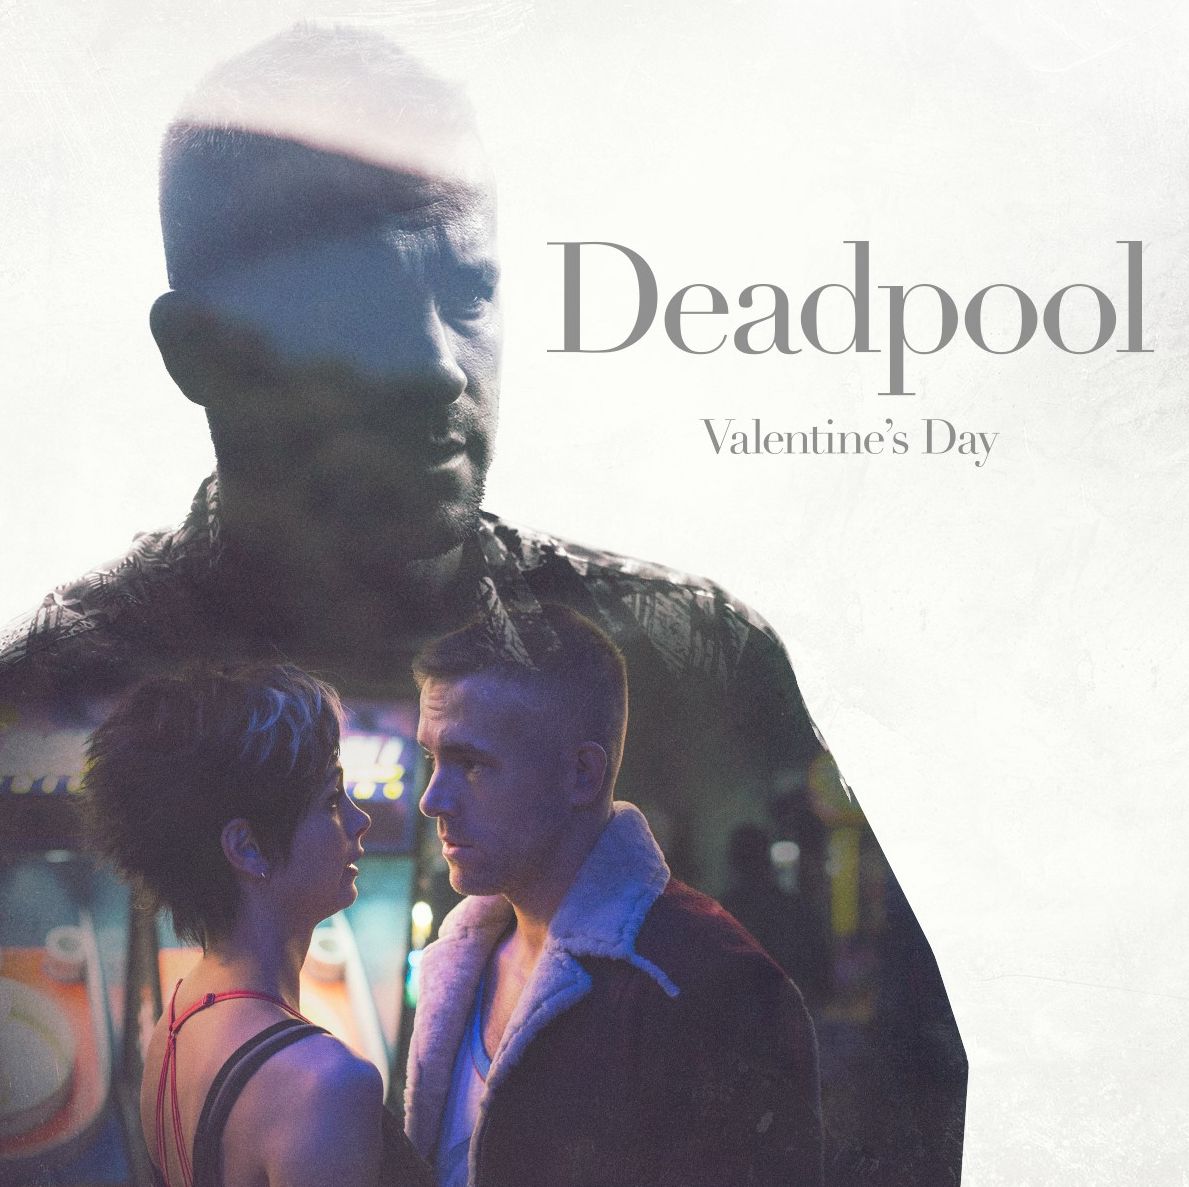 Fifty Shades of Slay with new Deadpool image, inspired by an